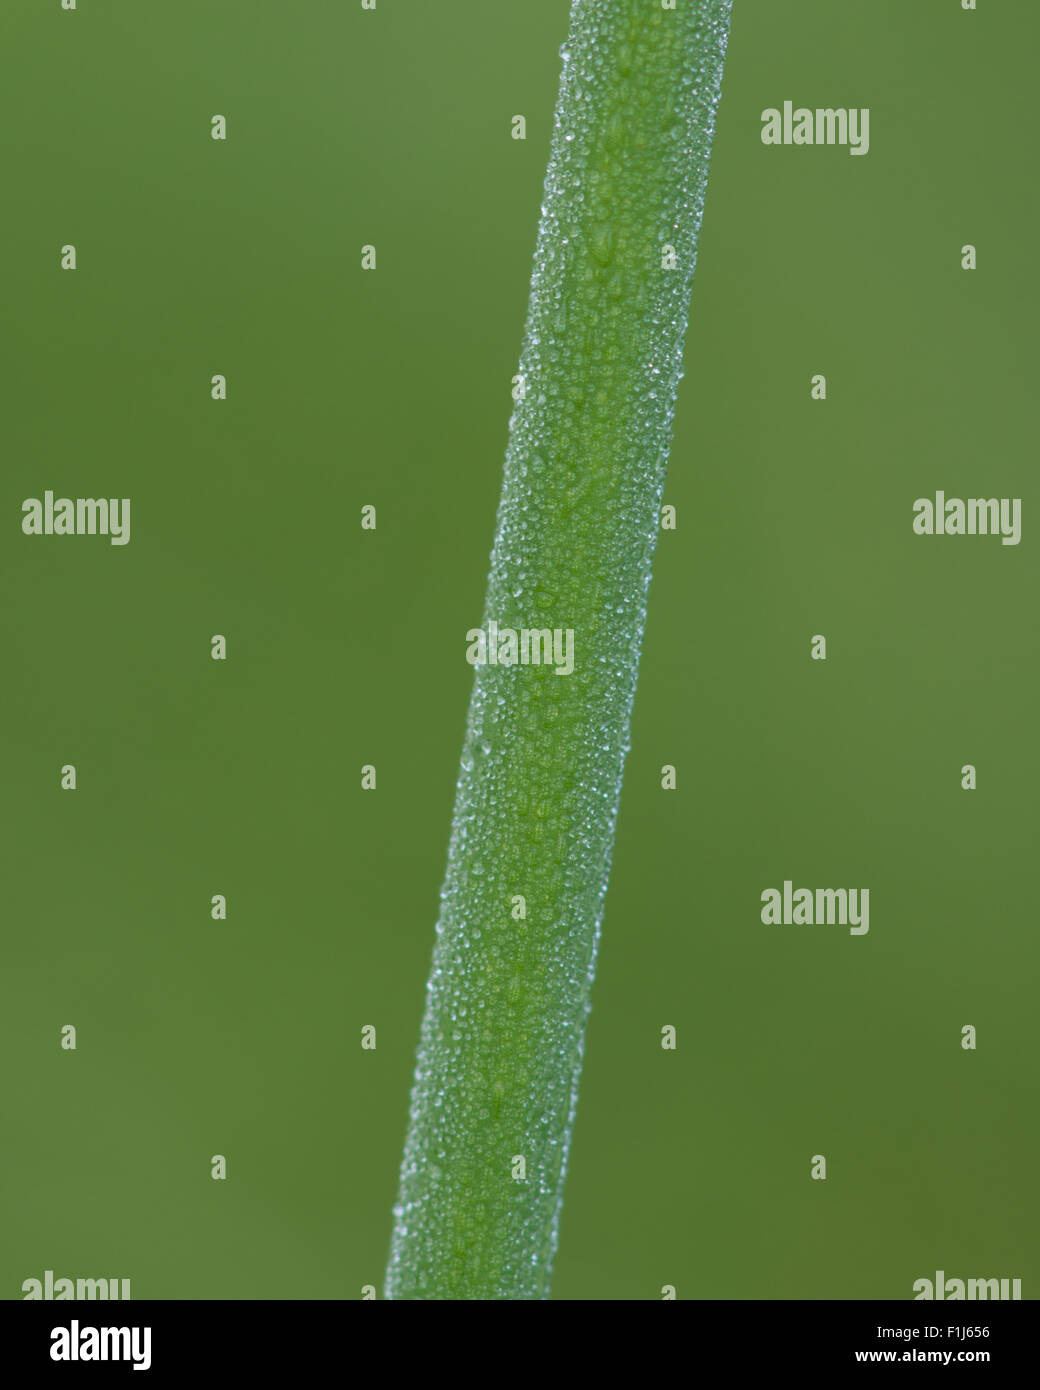 Tiny dew droplets collect on a single stem of bulrush (Scirpus sp) plant in a wetland. Stock Photo